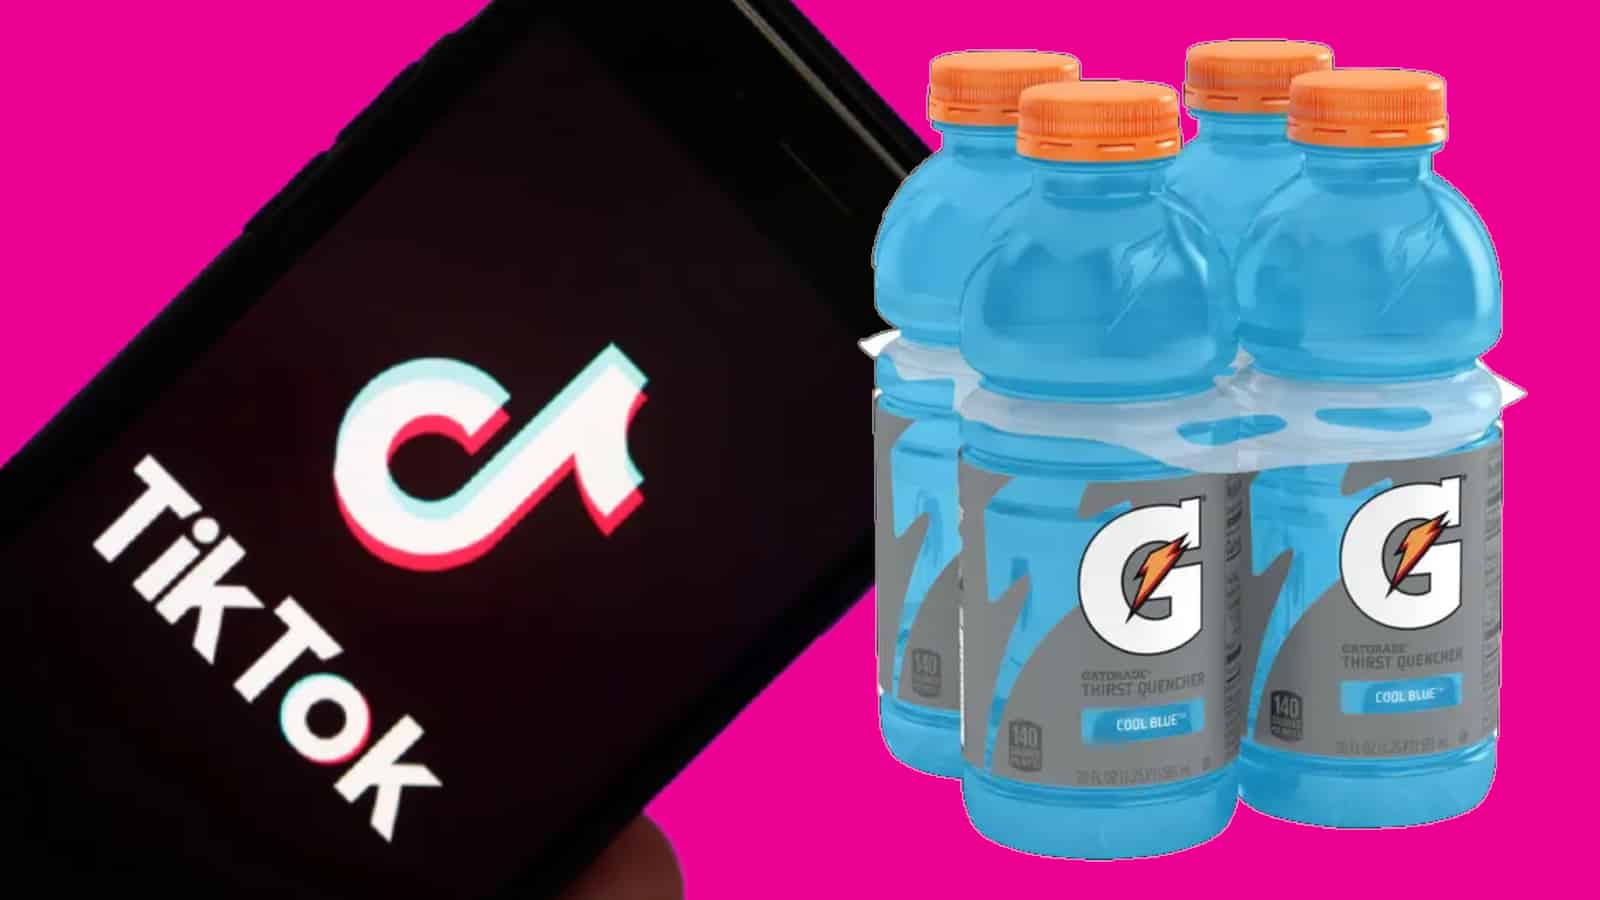 TikToker goes viral after showing people how to properly open Gatorade bottles